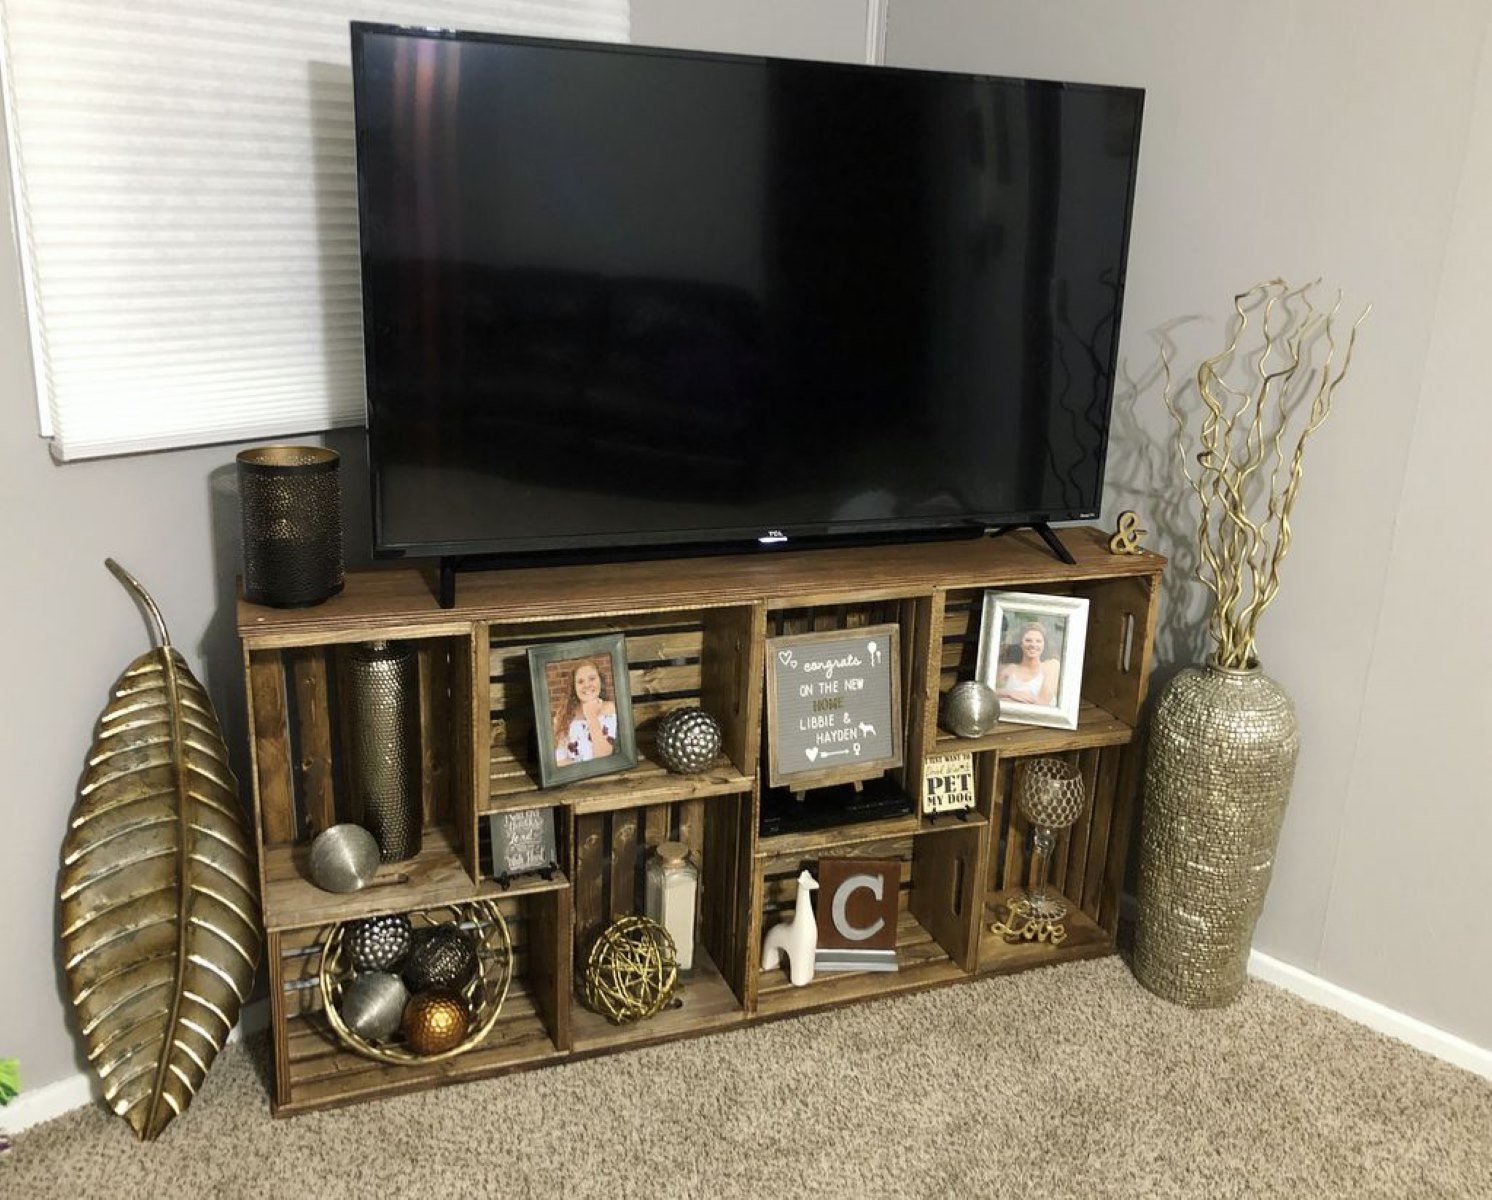 How To Make A TV Stand Out Of Wooden Crates